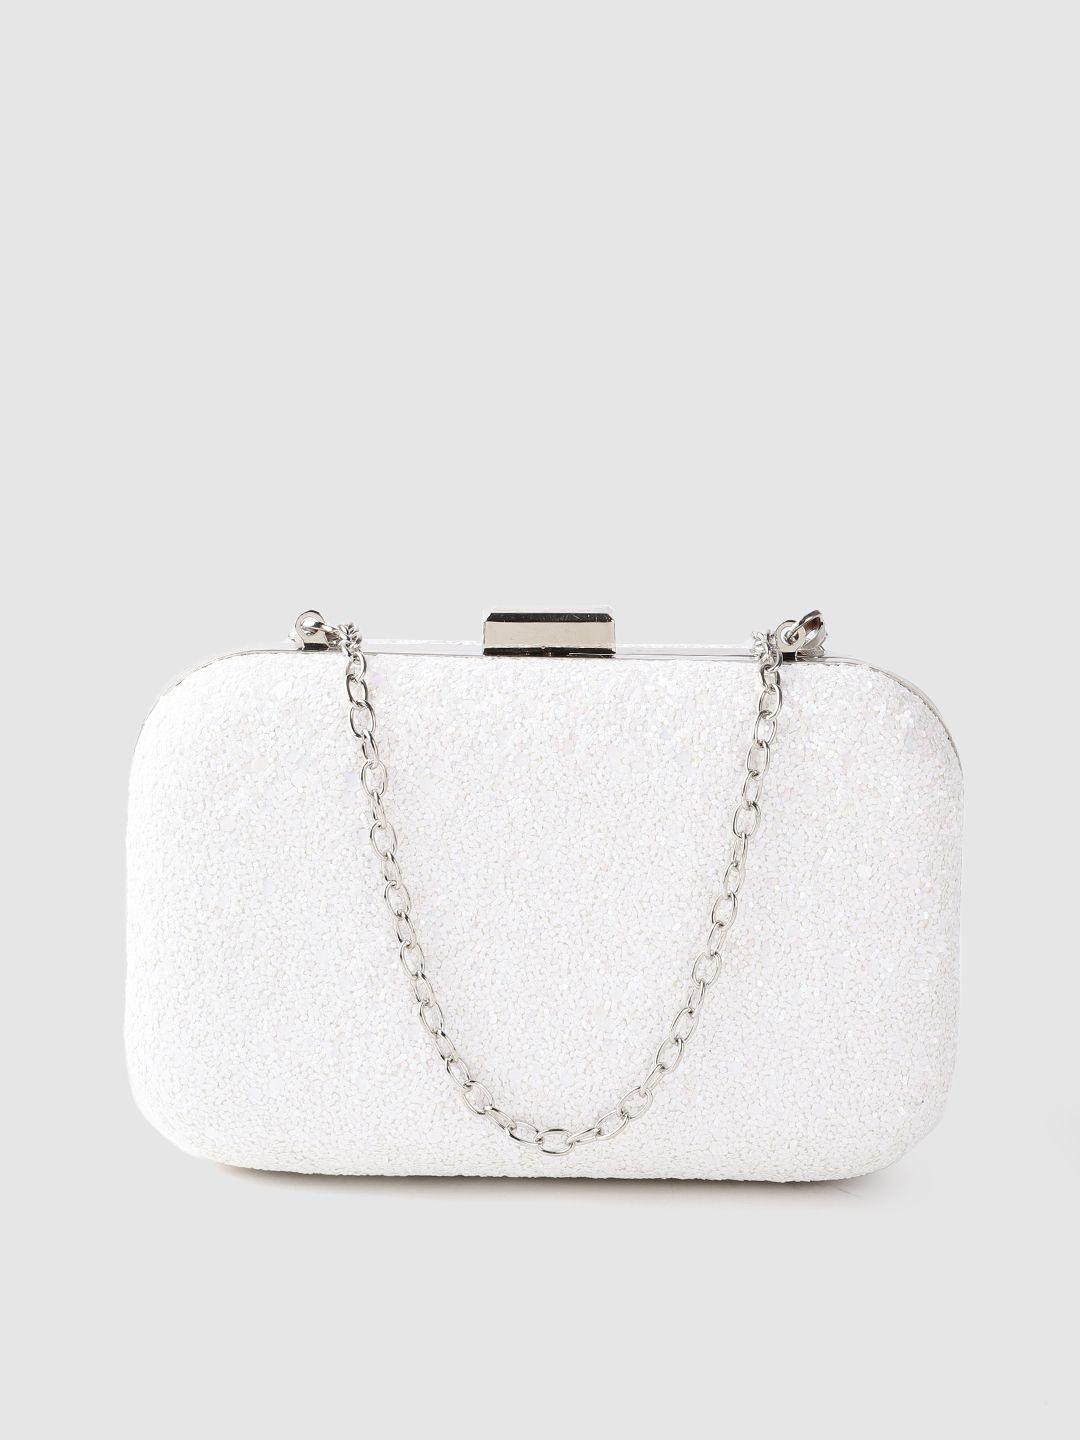 lino perros white glitter box clutch with detachable sling strap